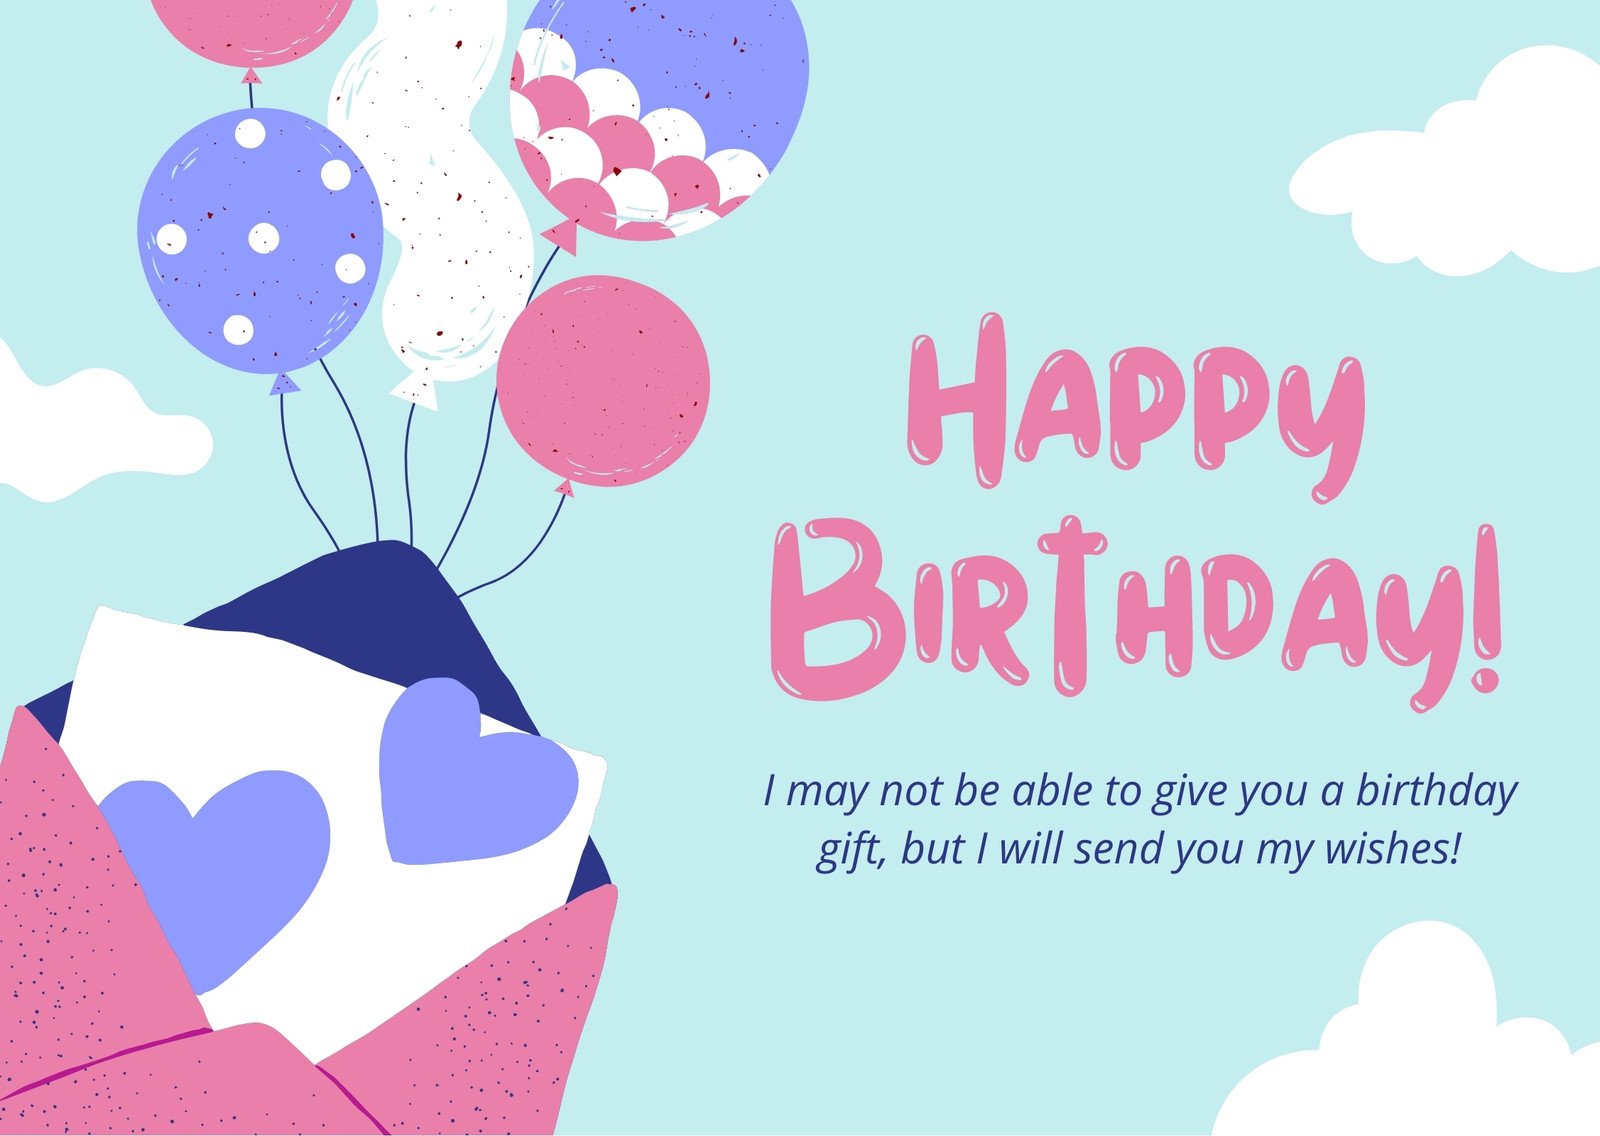 Birthday Card|Printable Card|Birthday Card for Friend,Family|Beautiful Card|E-card|Birthday Gift|Meaningful Card|Digital Download|FlowerCard